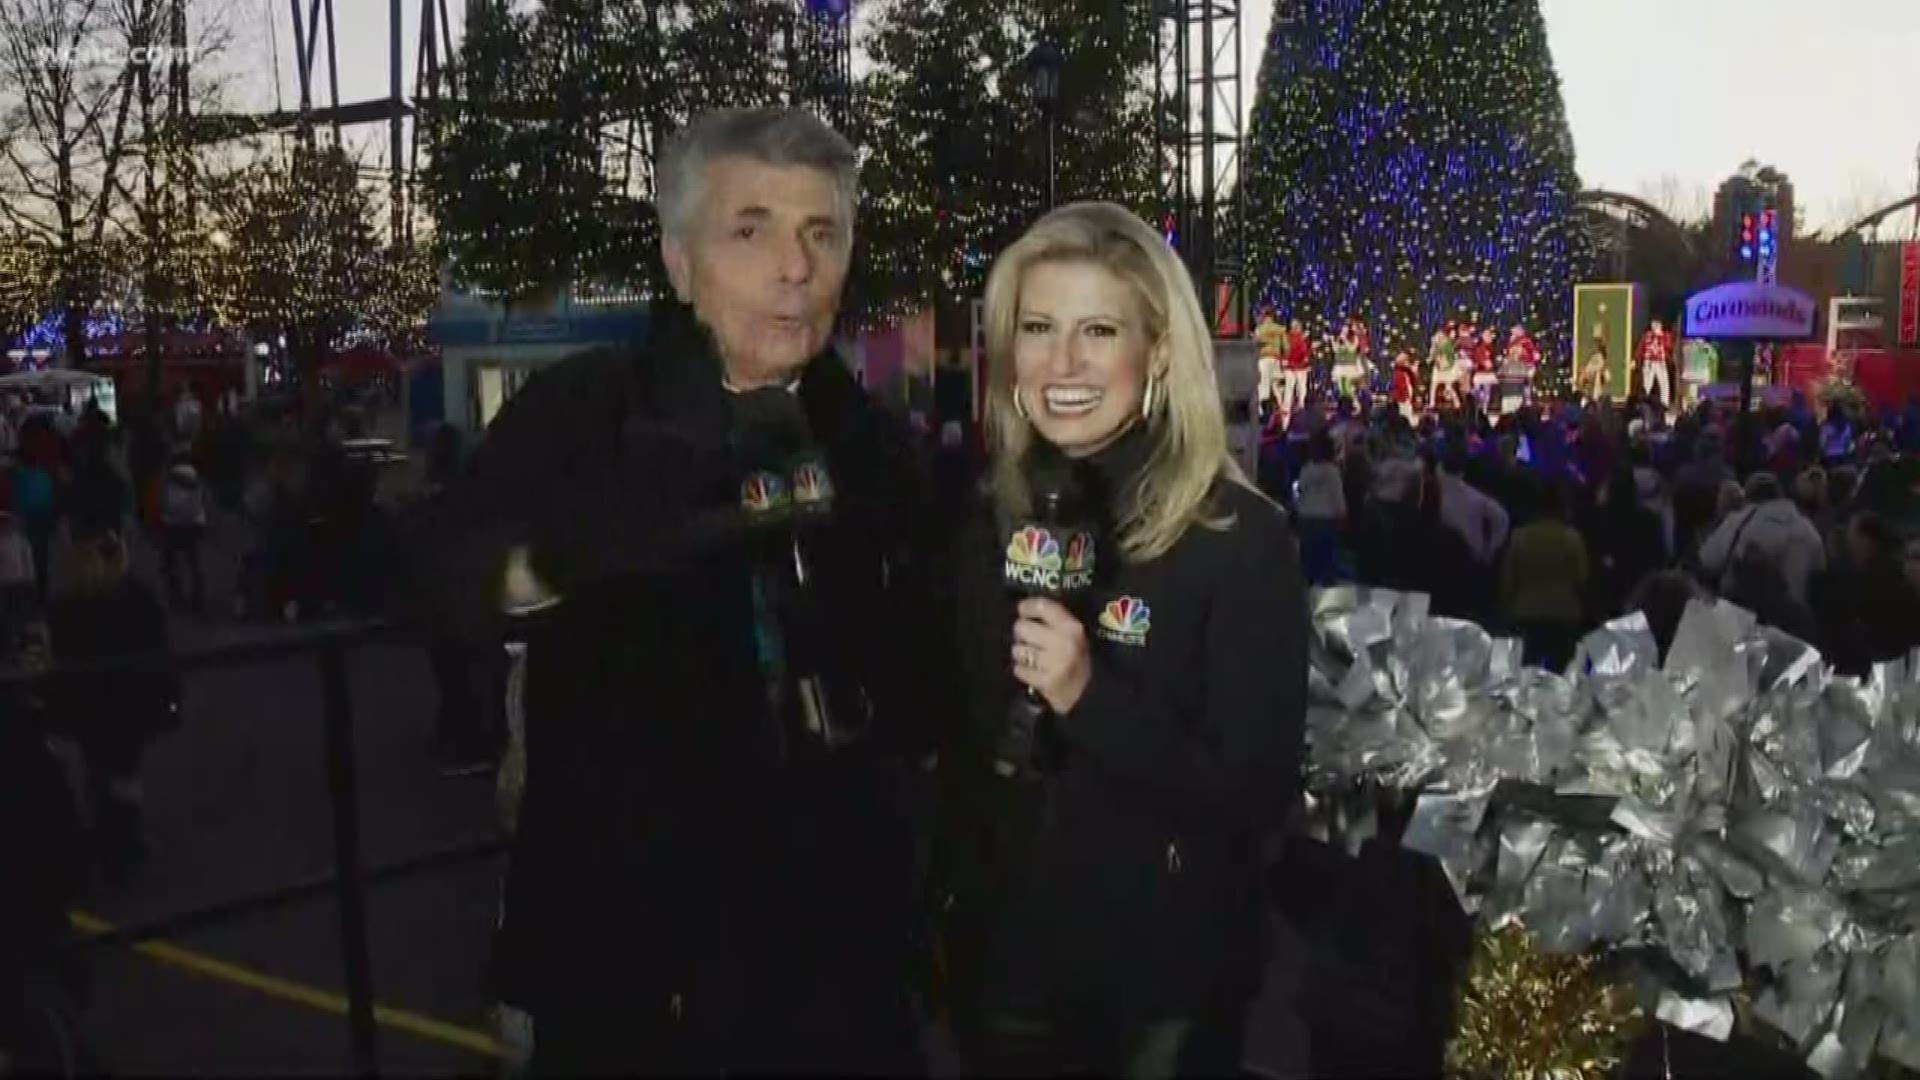 Winterfest goes until 1 a.m. at Carowinds. The big parade is held at 7 p.m.